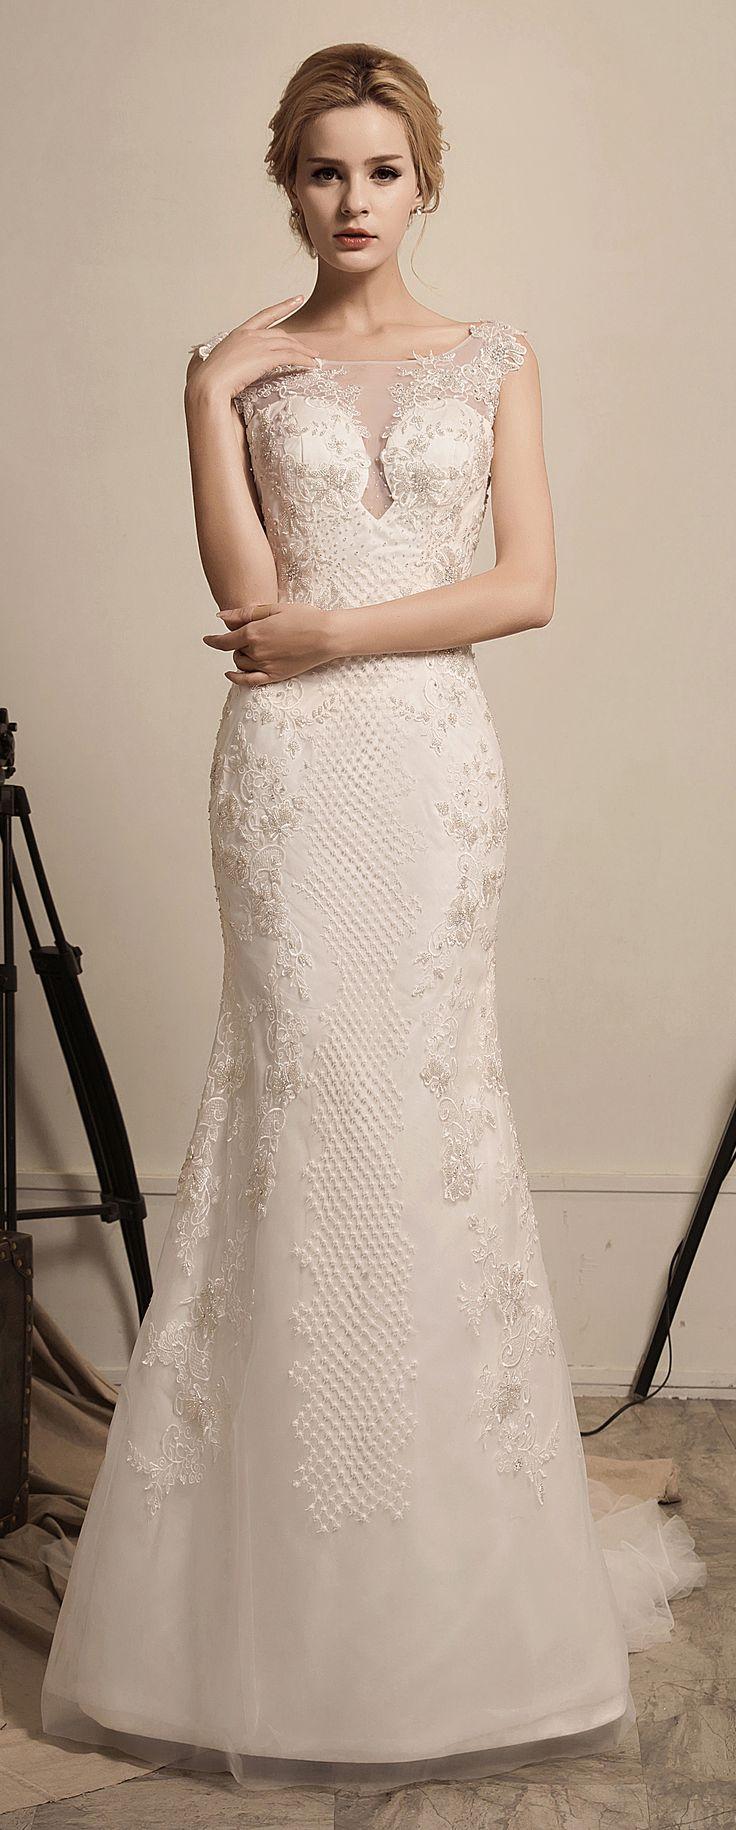 Hochzeit - Fairy Queen - Selena Huan Tank Silver Water Soluble Lace Beaded Sheath Gown With Detachable Layered Train